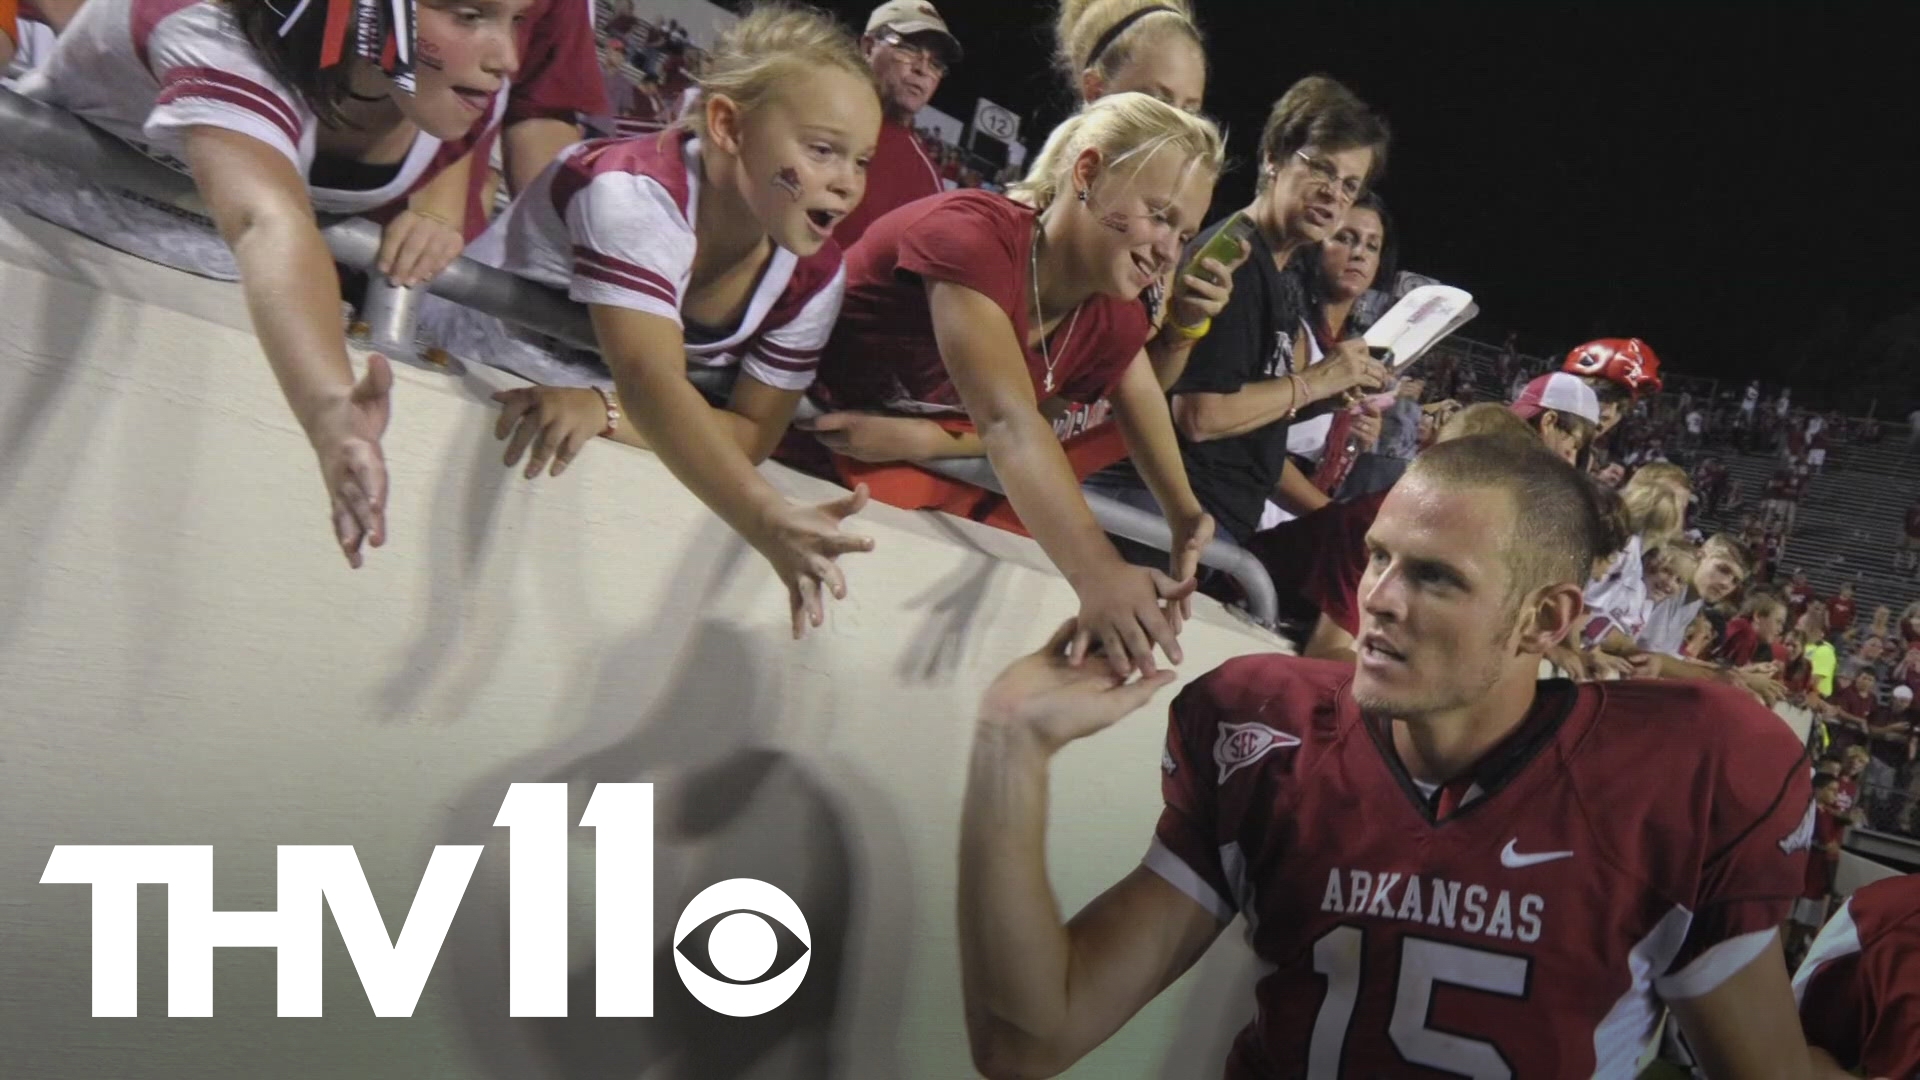 It has been one year since legendary Arkansas quarterback Ryan Mallett tragically drowned at 35 years old, however, his legacy lives on thanks to his family.